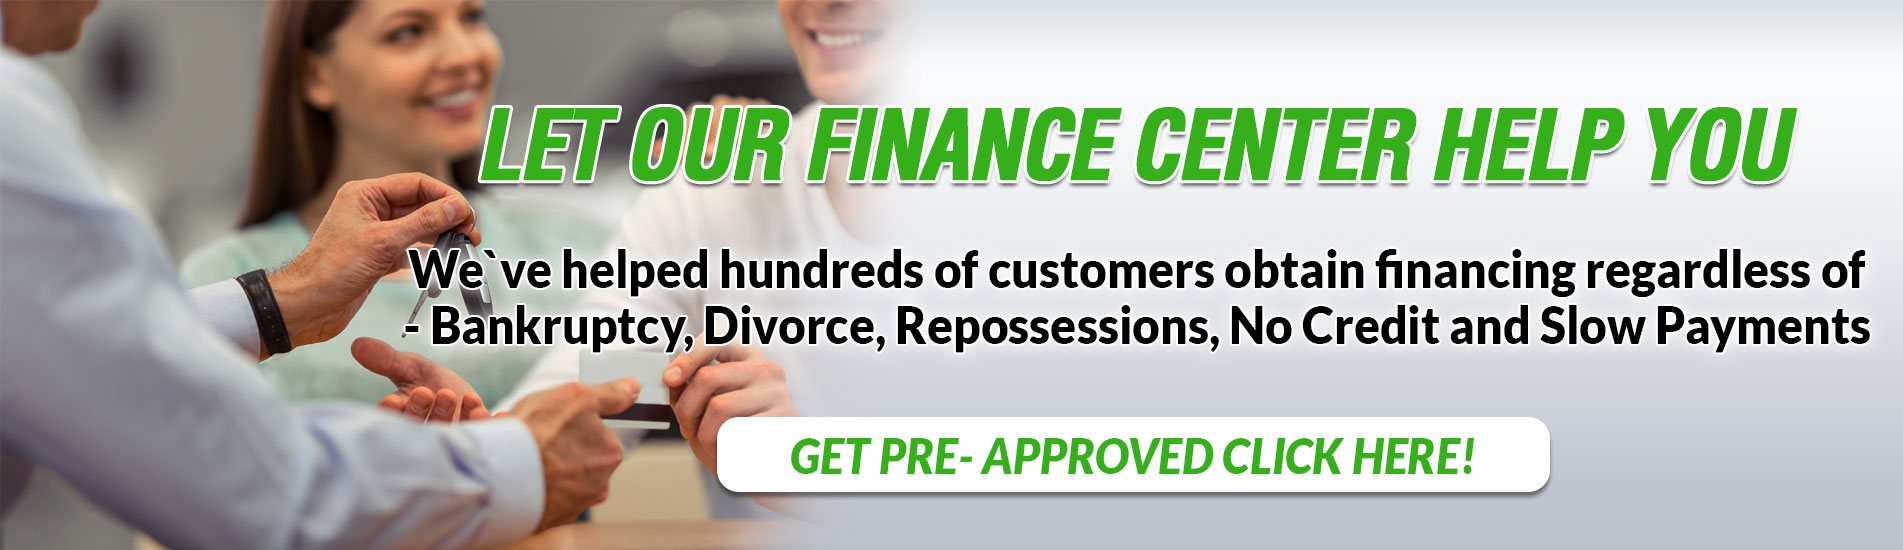 Let our finance center help you